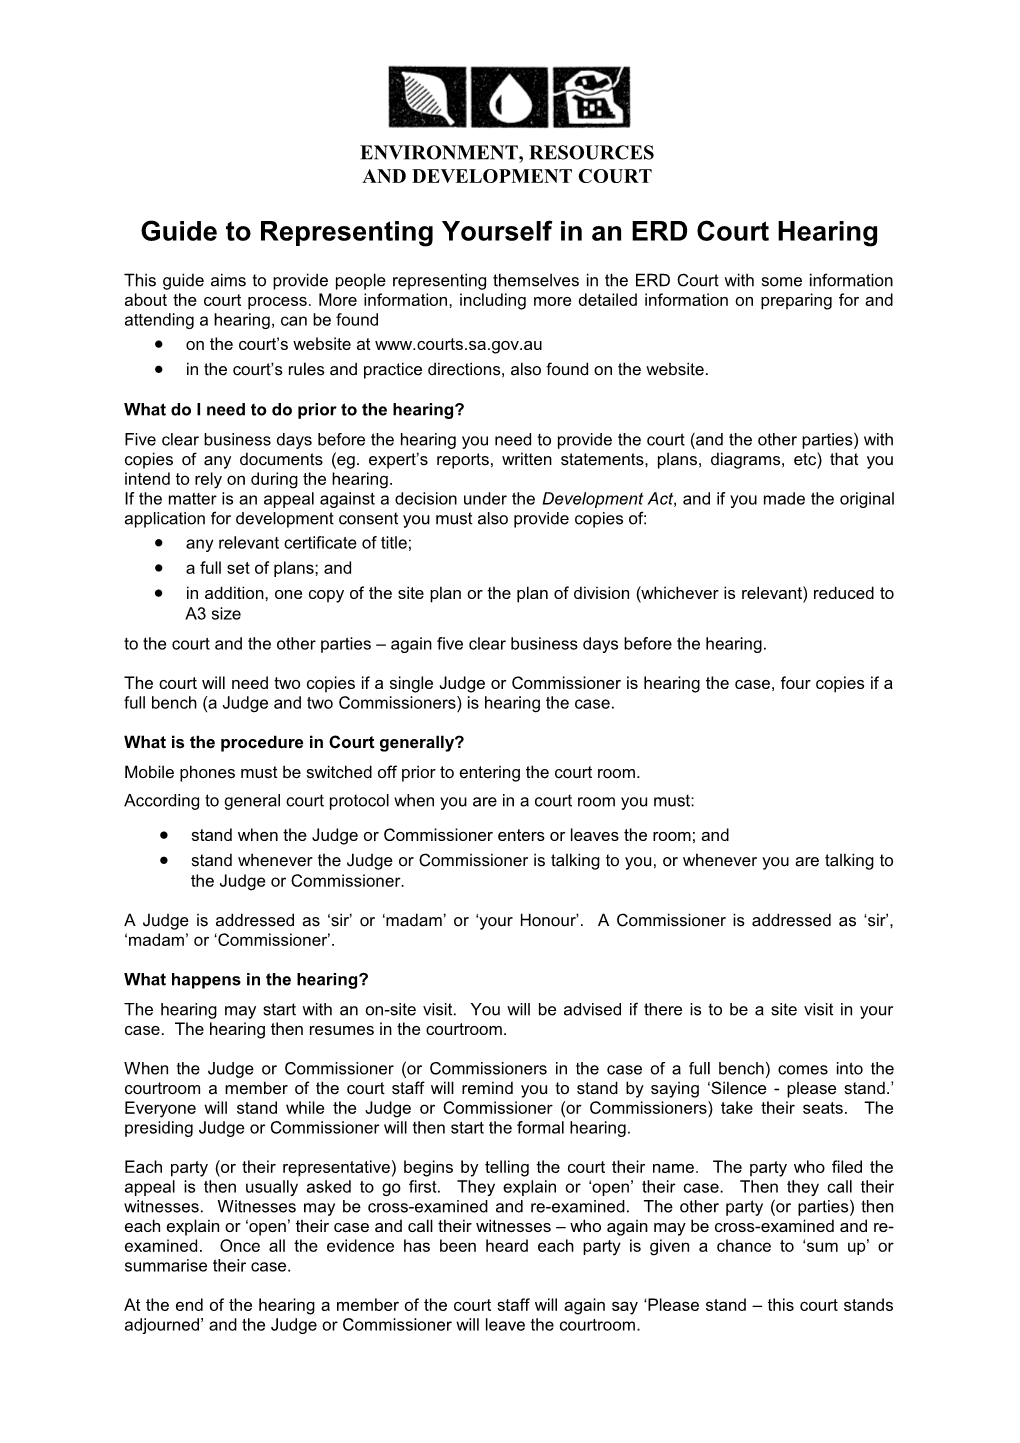 Guide to Representing Yourself in an ERD Court Hearing